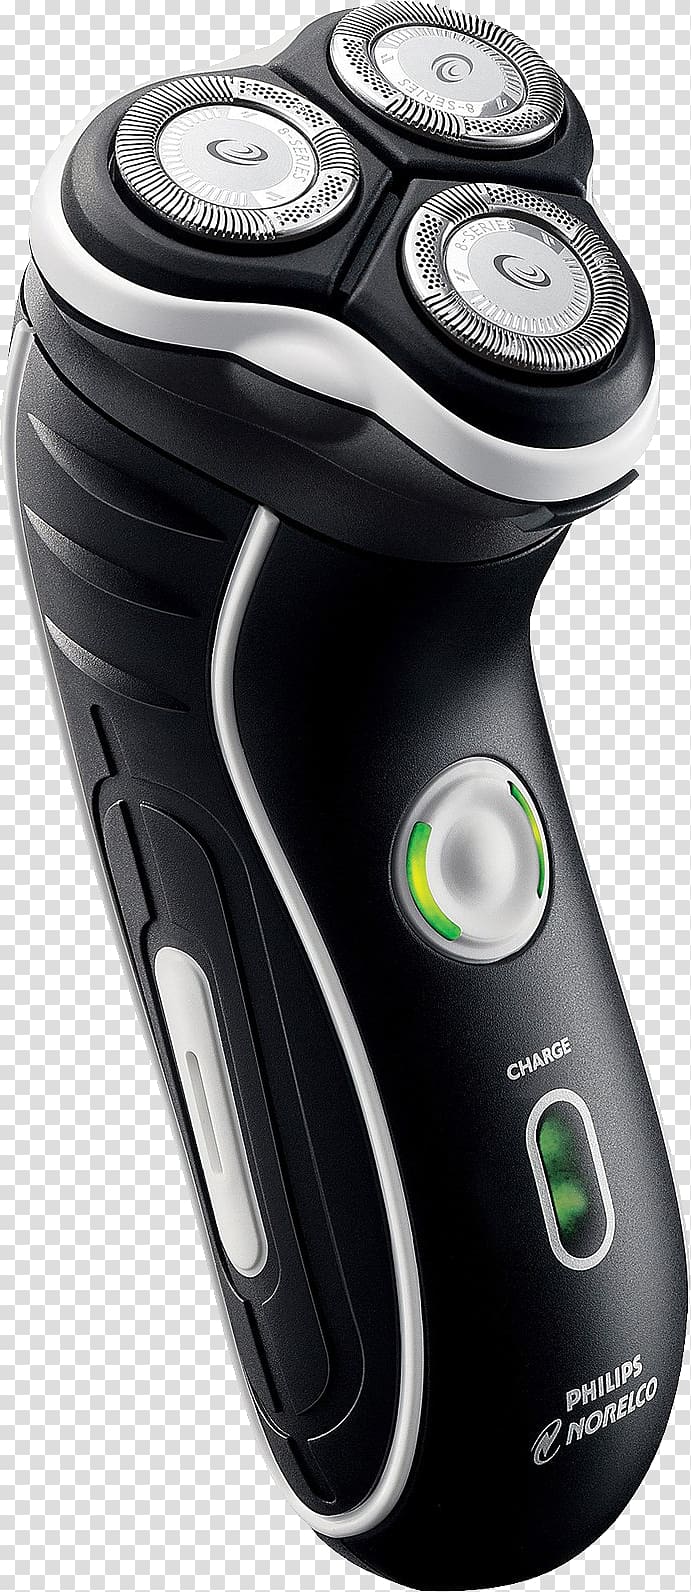 Shaving Norelco Electric razor Hair clipper, Electric razor transparent background PNG clipart